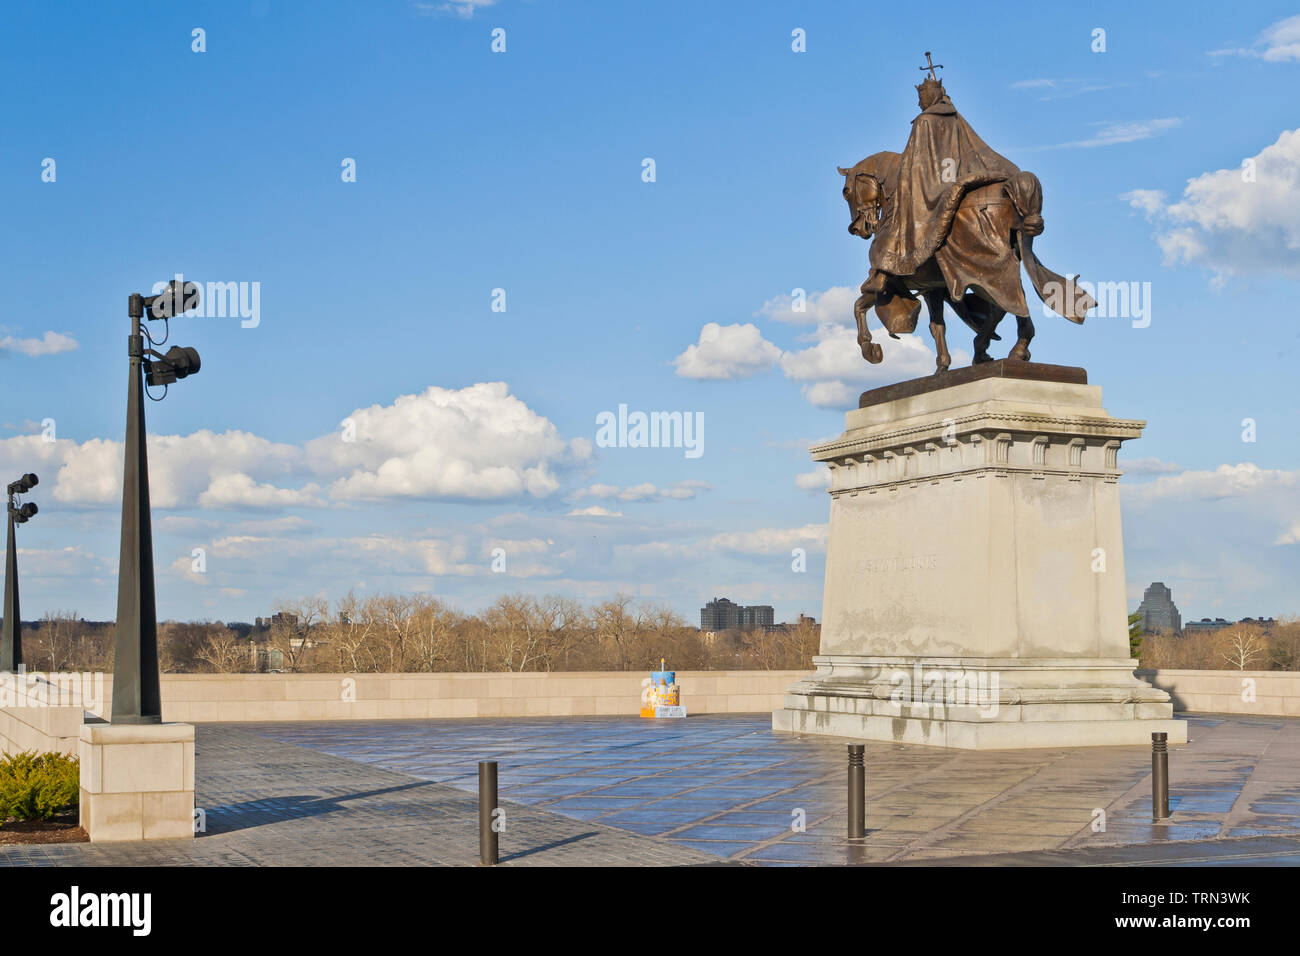 St. Louis celebrates 250 years with a birthday cake ornament near the statue of Saint Louis for the St. Louis Art Museum on an April day in 2014. Stock Photo